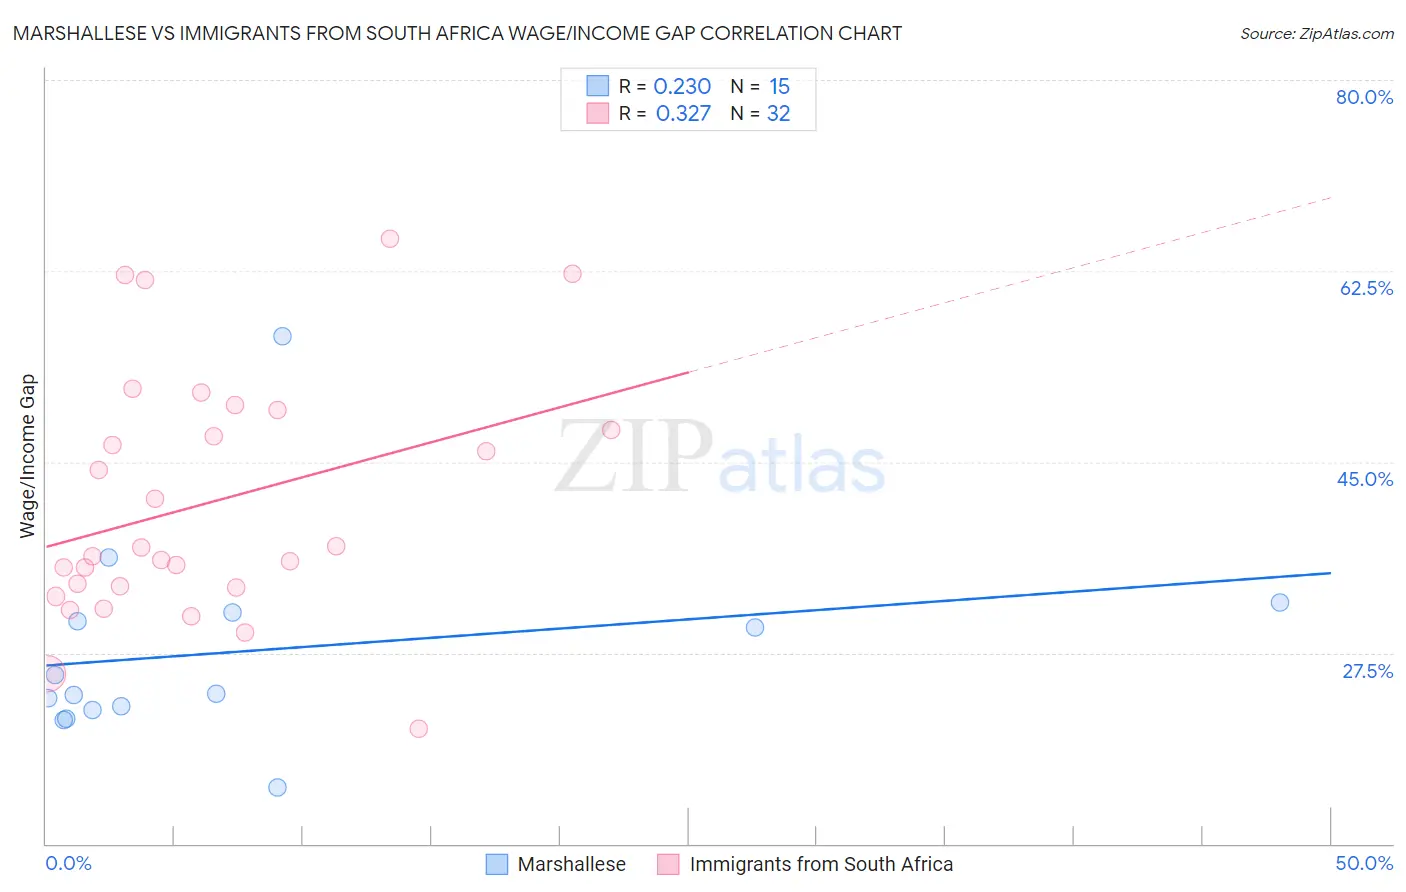 Marshallese vs Immigrants from South Africa Wage/Income Gap